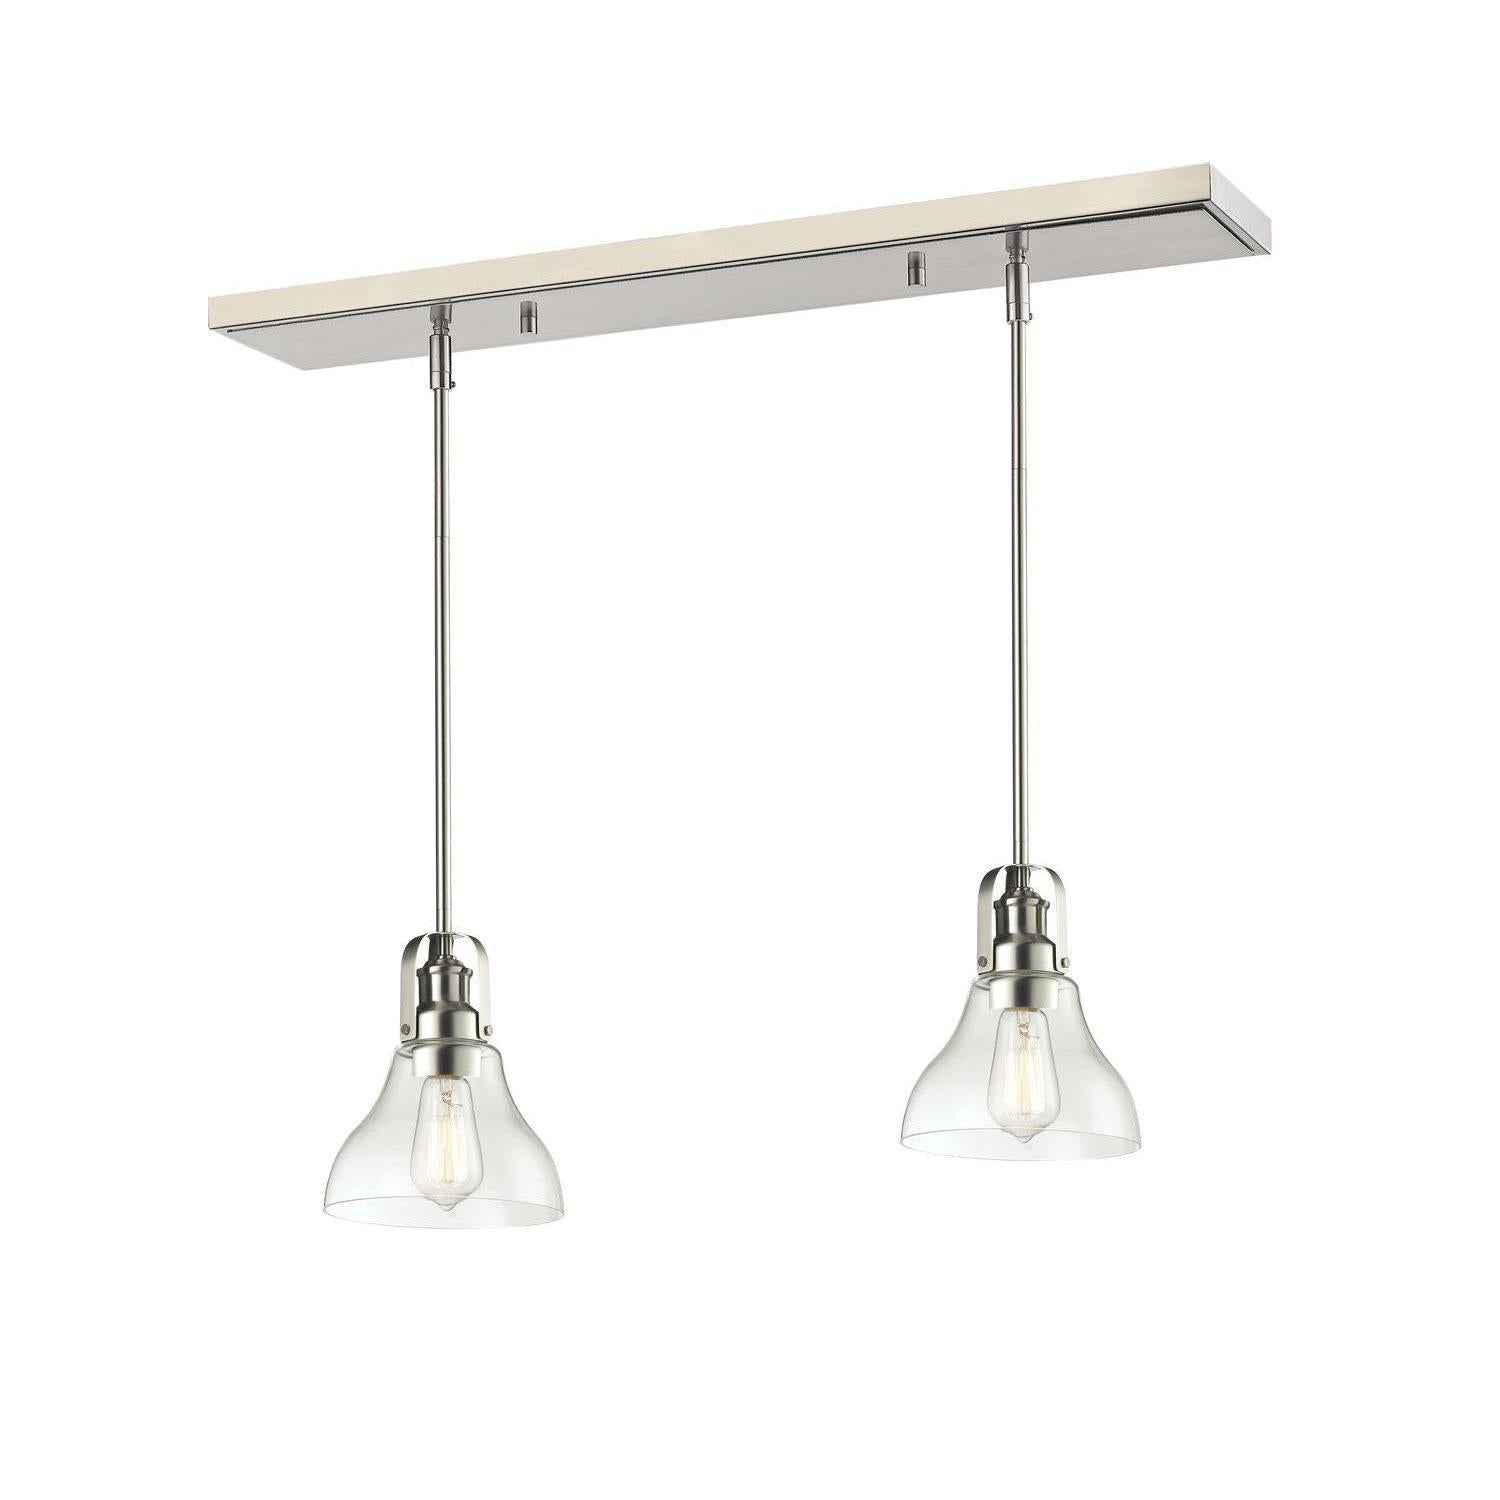 Forge Linear Suspension Brushed Nickel